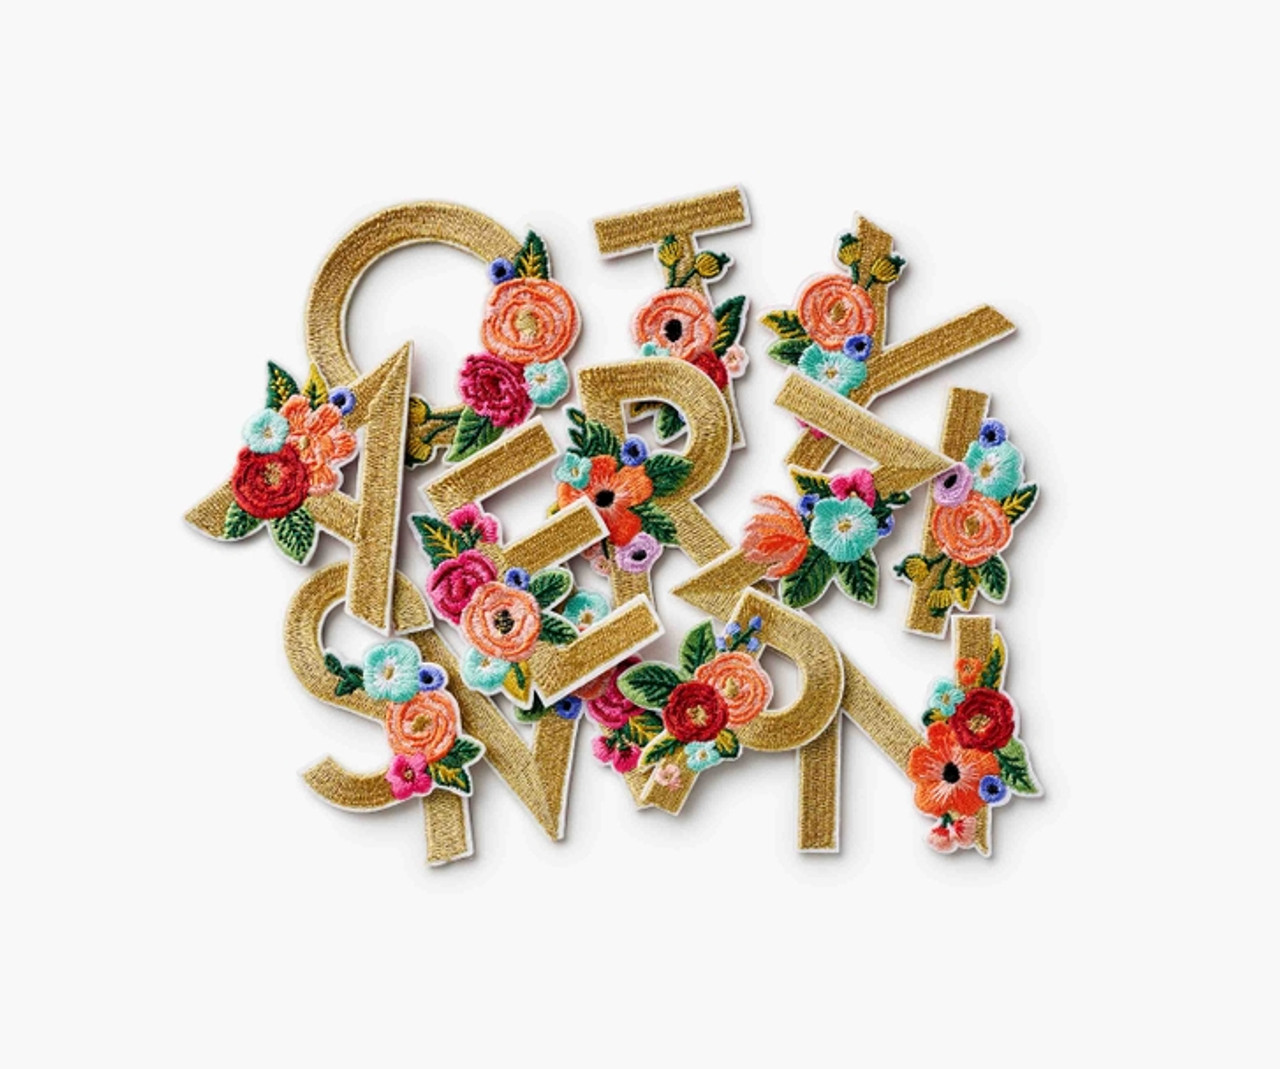 P and S two letters embroidery monogram